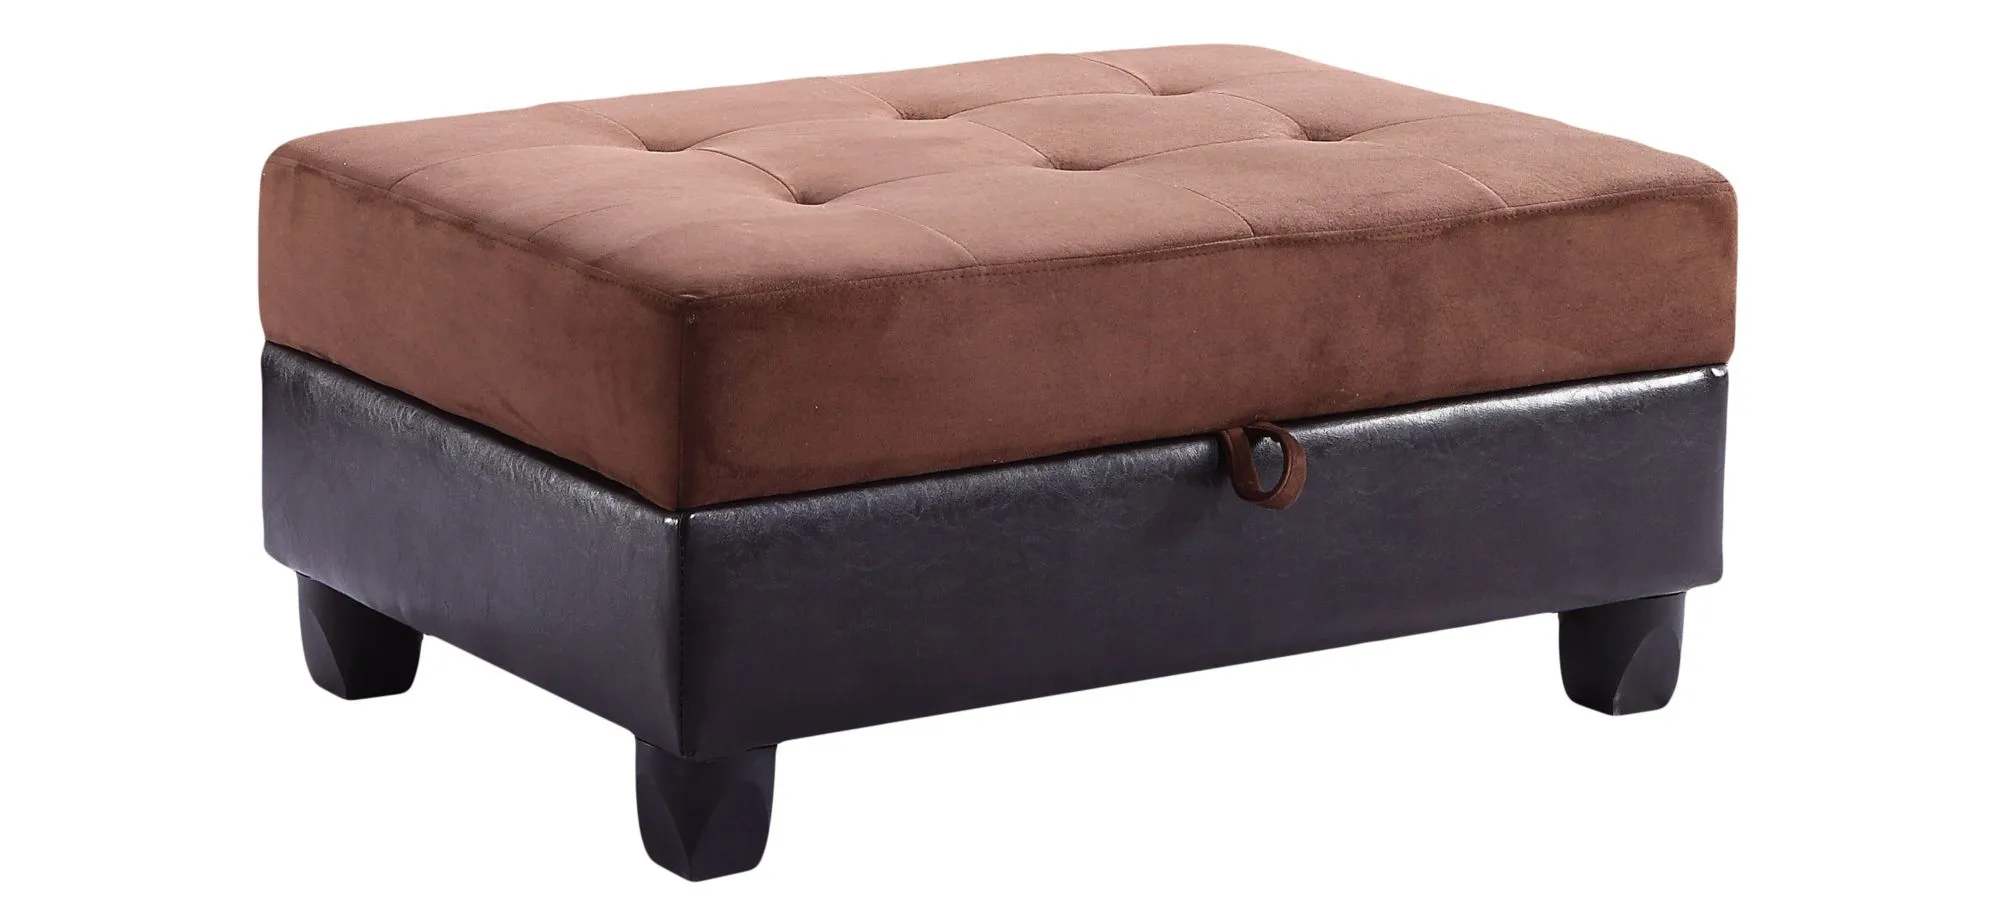 Gallant Storage Ottoman in Chocolate by Glory Furniture